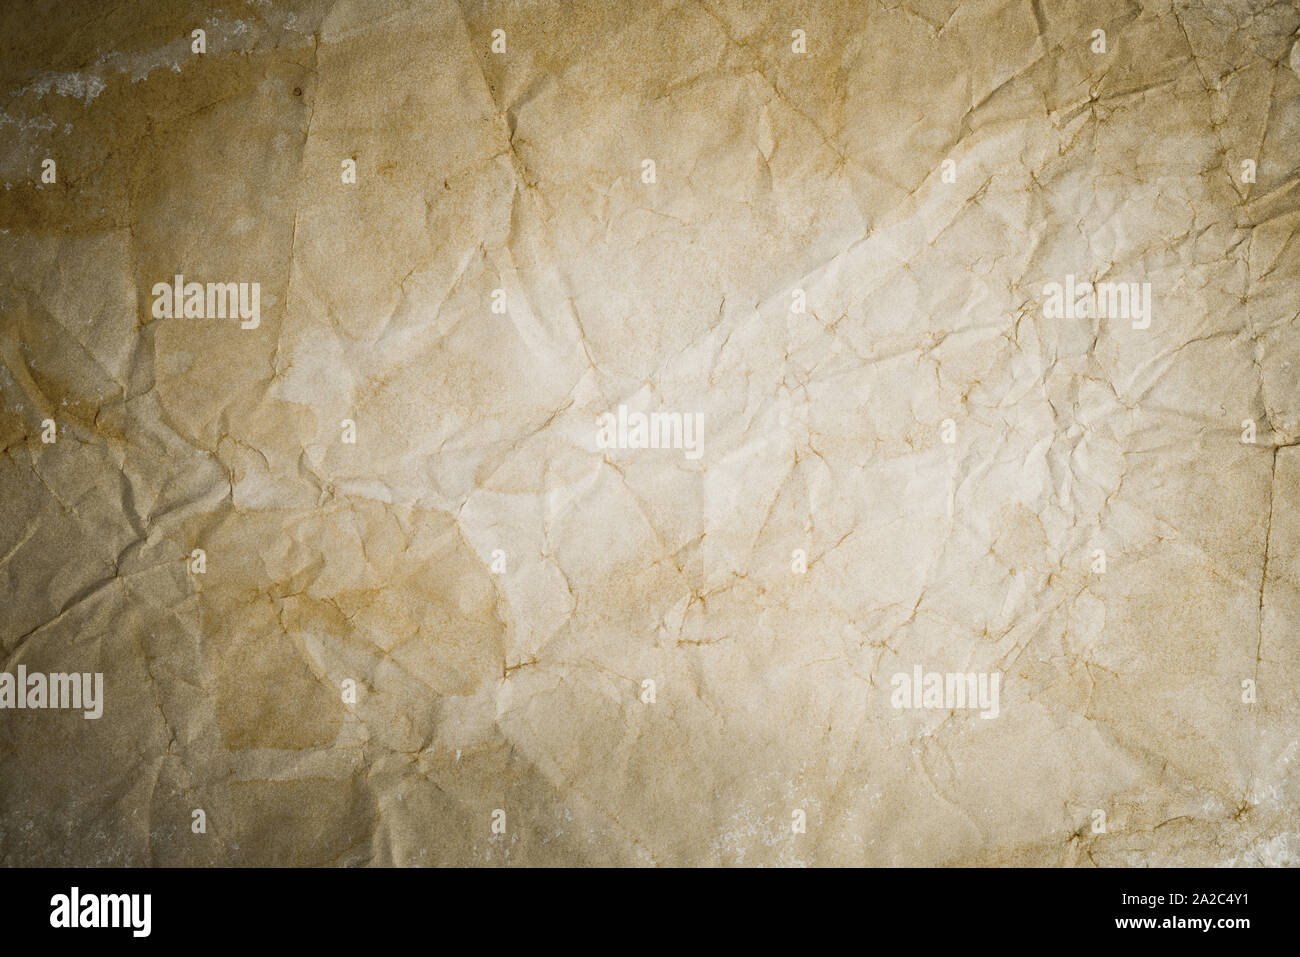 Old crumpled paper background Stock Photo